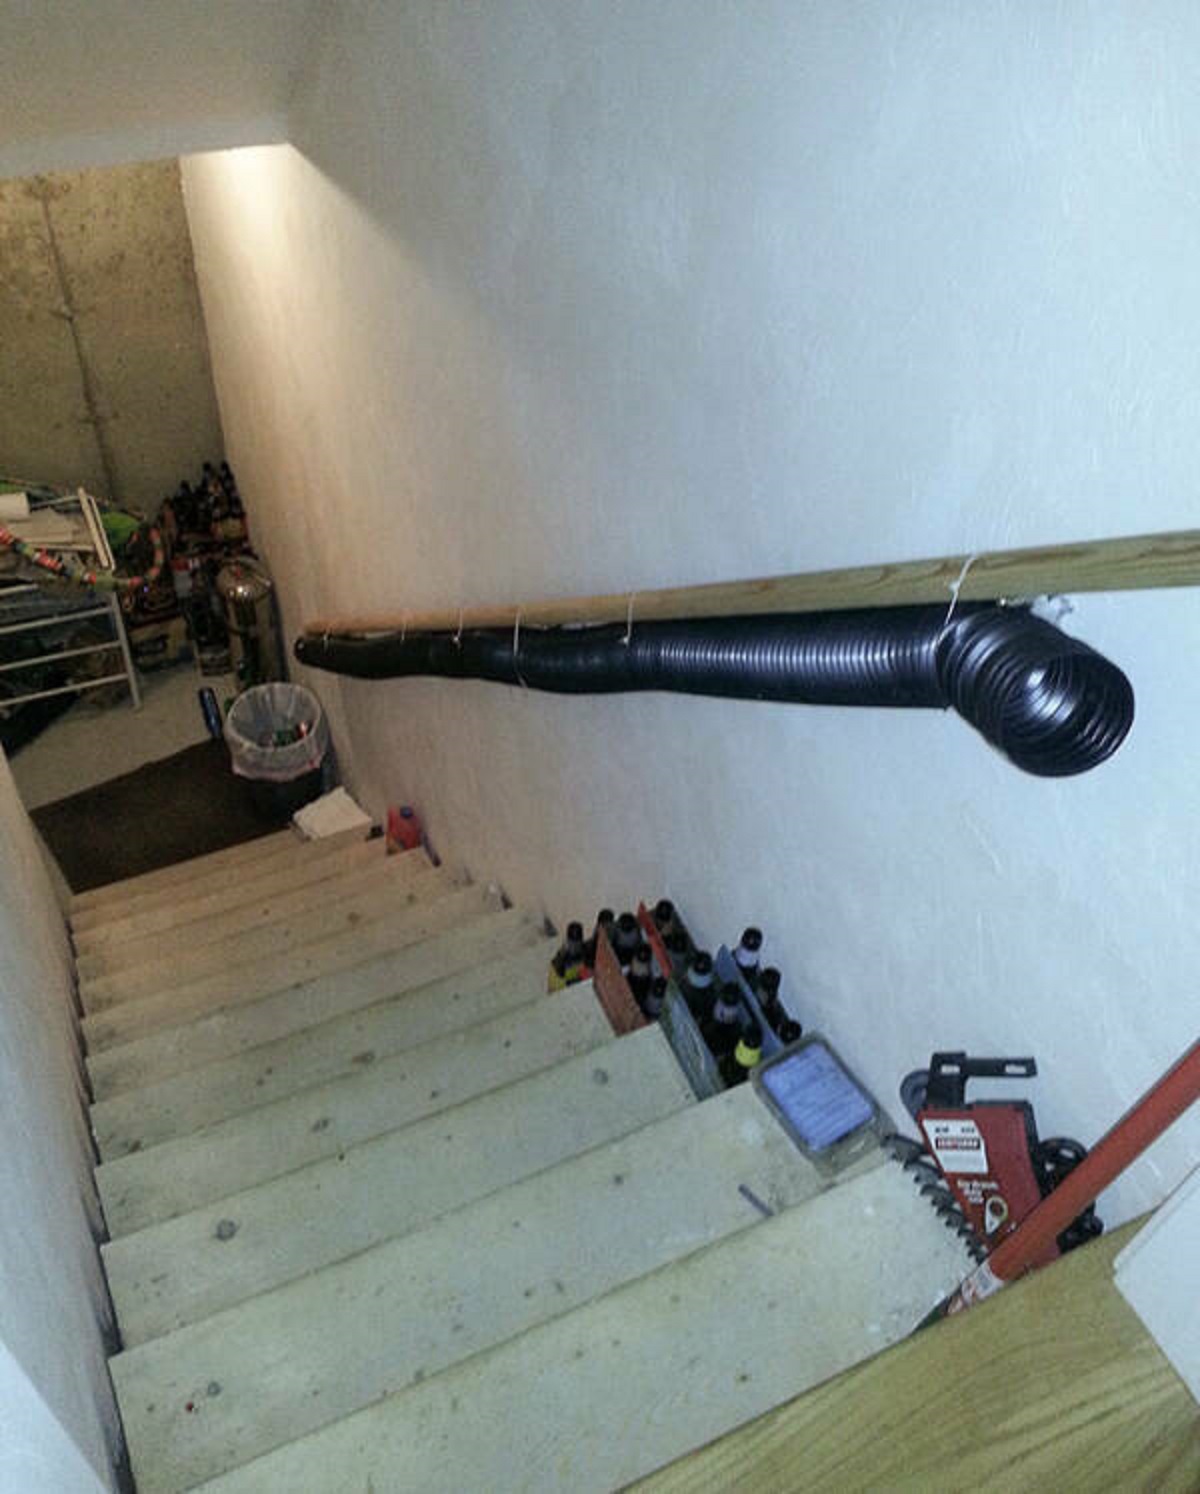 “Laziness meets ingenuity, me: “what’s that pipe on your railing?” sister: “it’s our soda can chute”